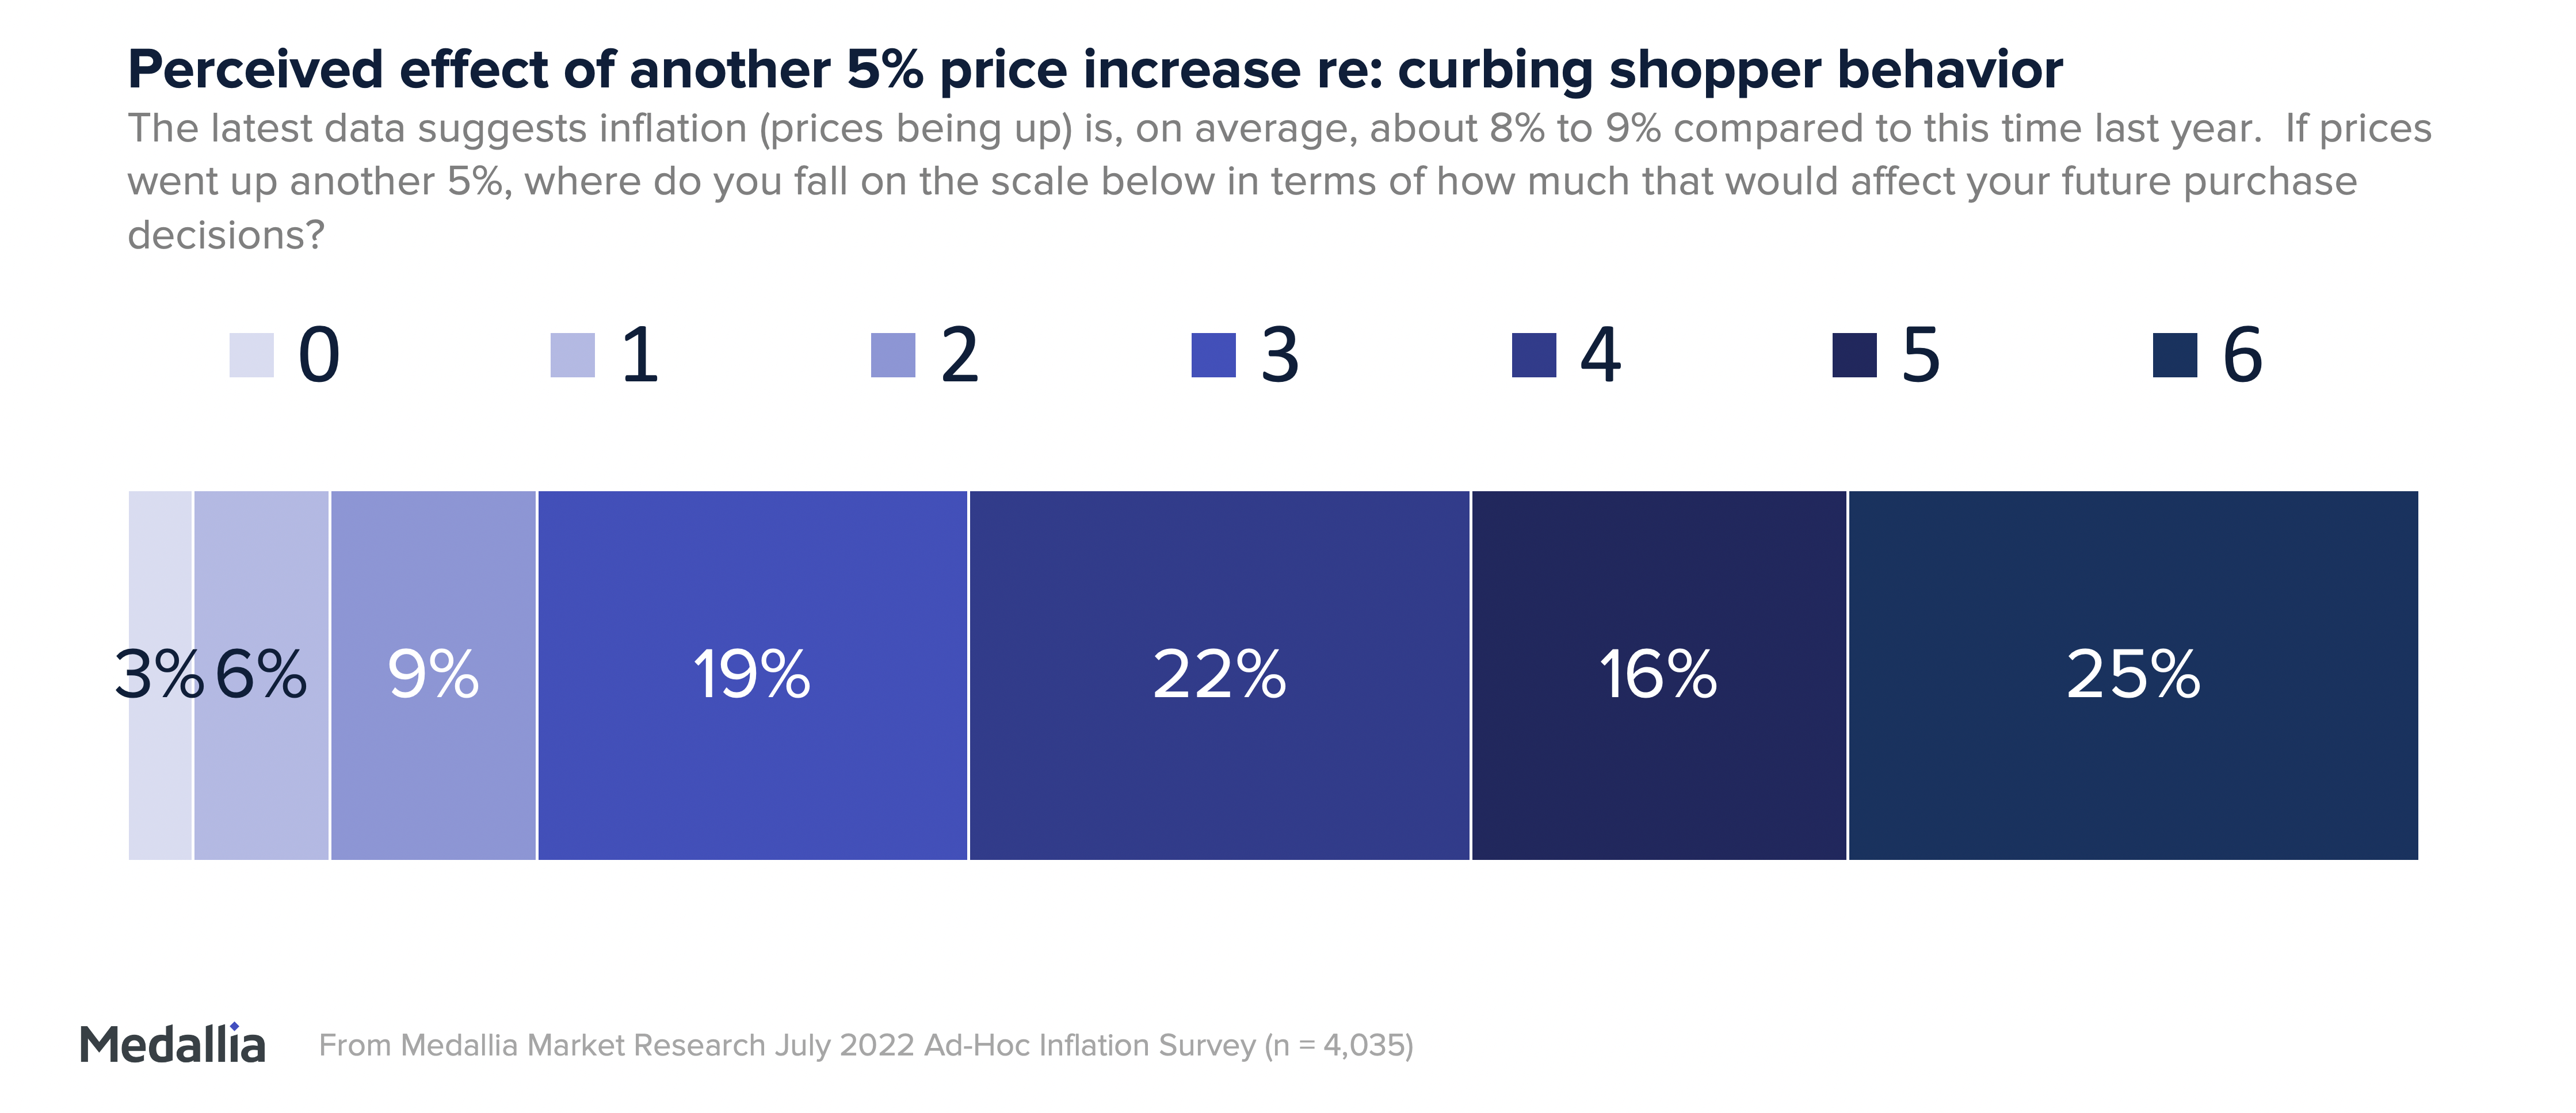 Perceived effect of another 5% price increase re: curbing shopping behavior. Most people would not like inflation to continue.